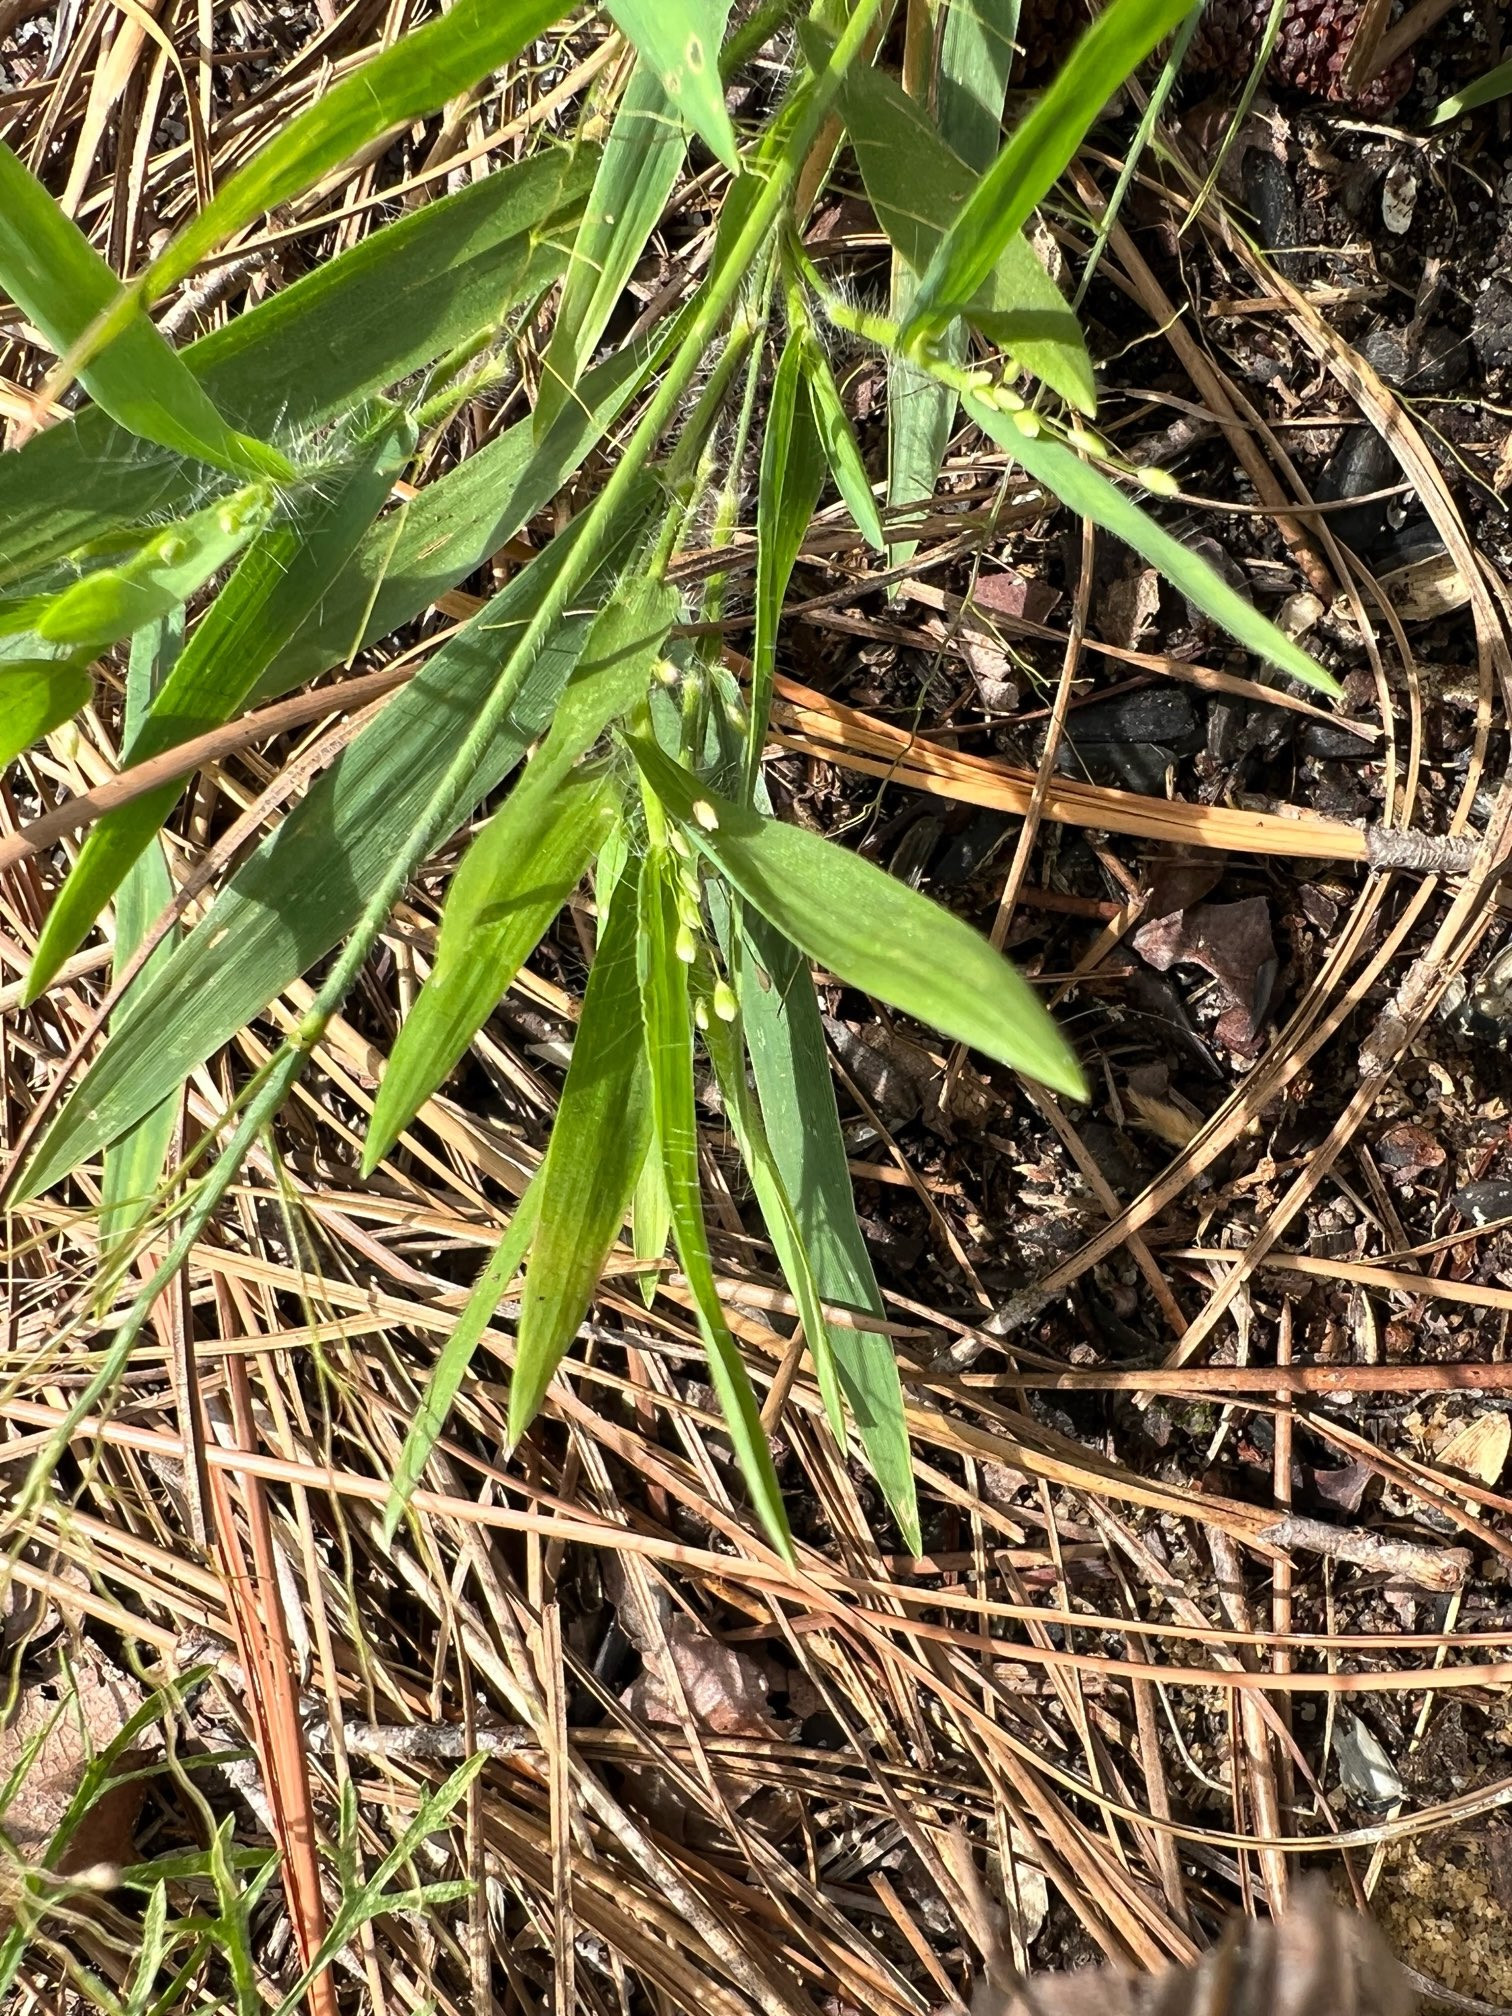 The Scientific Name is Dichanthelium clandestinum [= Panicum clandestinum]. You will likely hear them called Deer-tongue Witchgrass, Deertongue. This picture shows the Notice the spreading hairs on the leaf sheaths. of Dichanthelium clandestinum [= Panicum clandestinum]